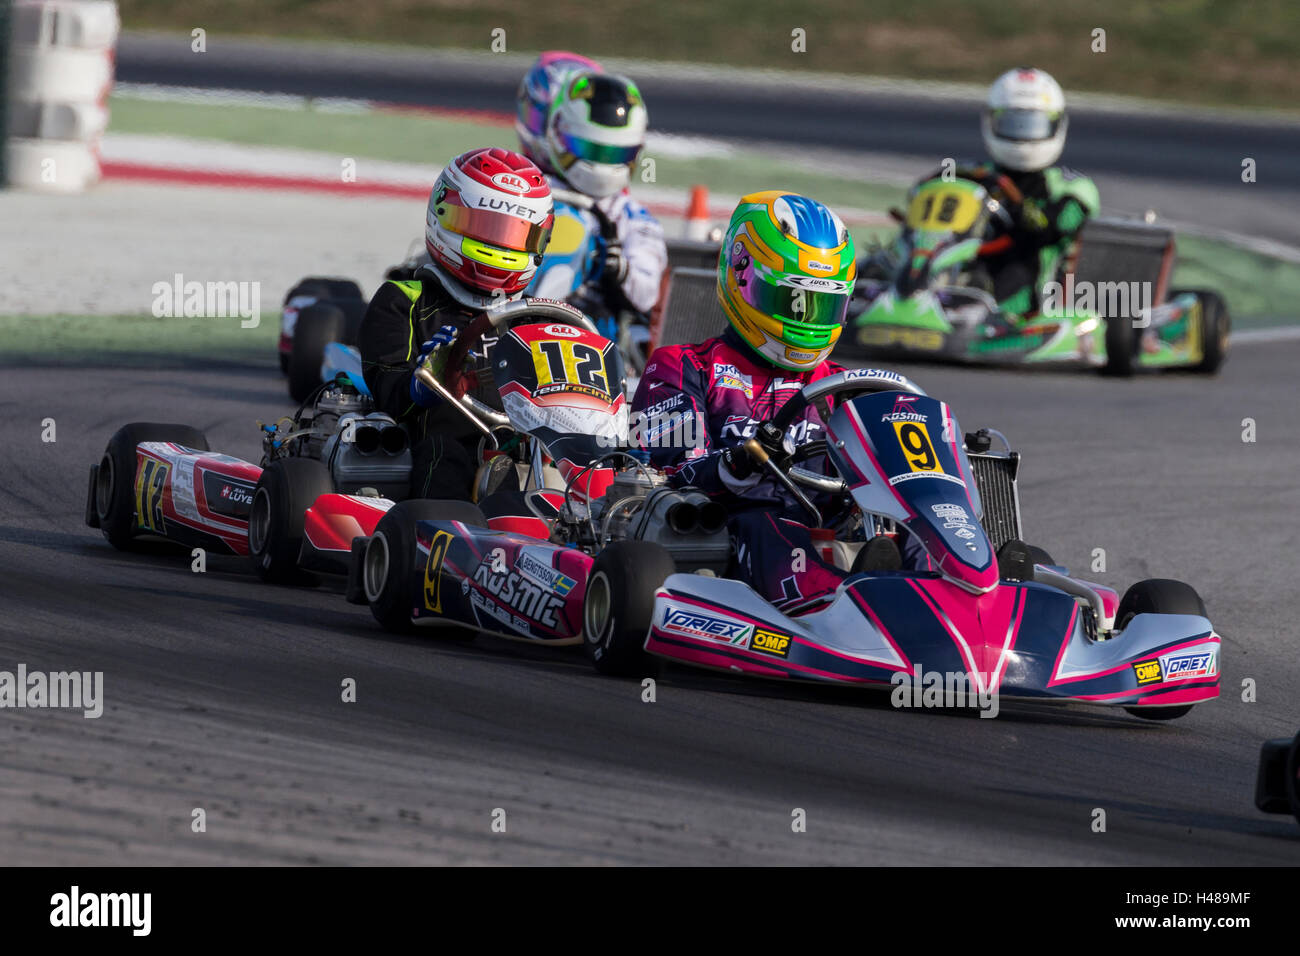 Adria, Rovigo (Italy) - October 1, 2016: Kosmic Racing Team, driven by Bengtsson Axel during eliminatory heat in the Wsk Final Stock Photo